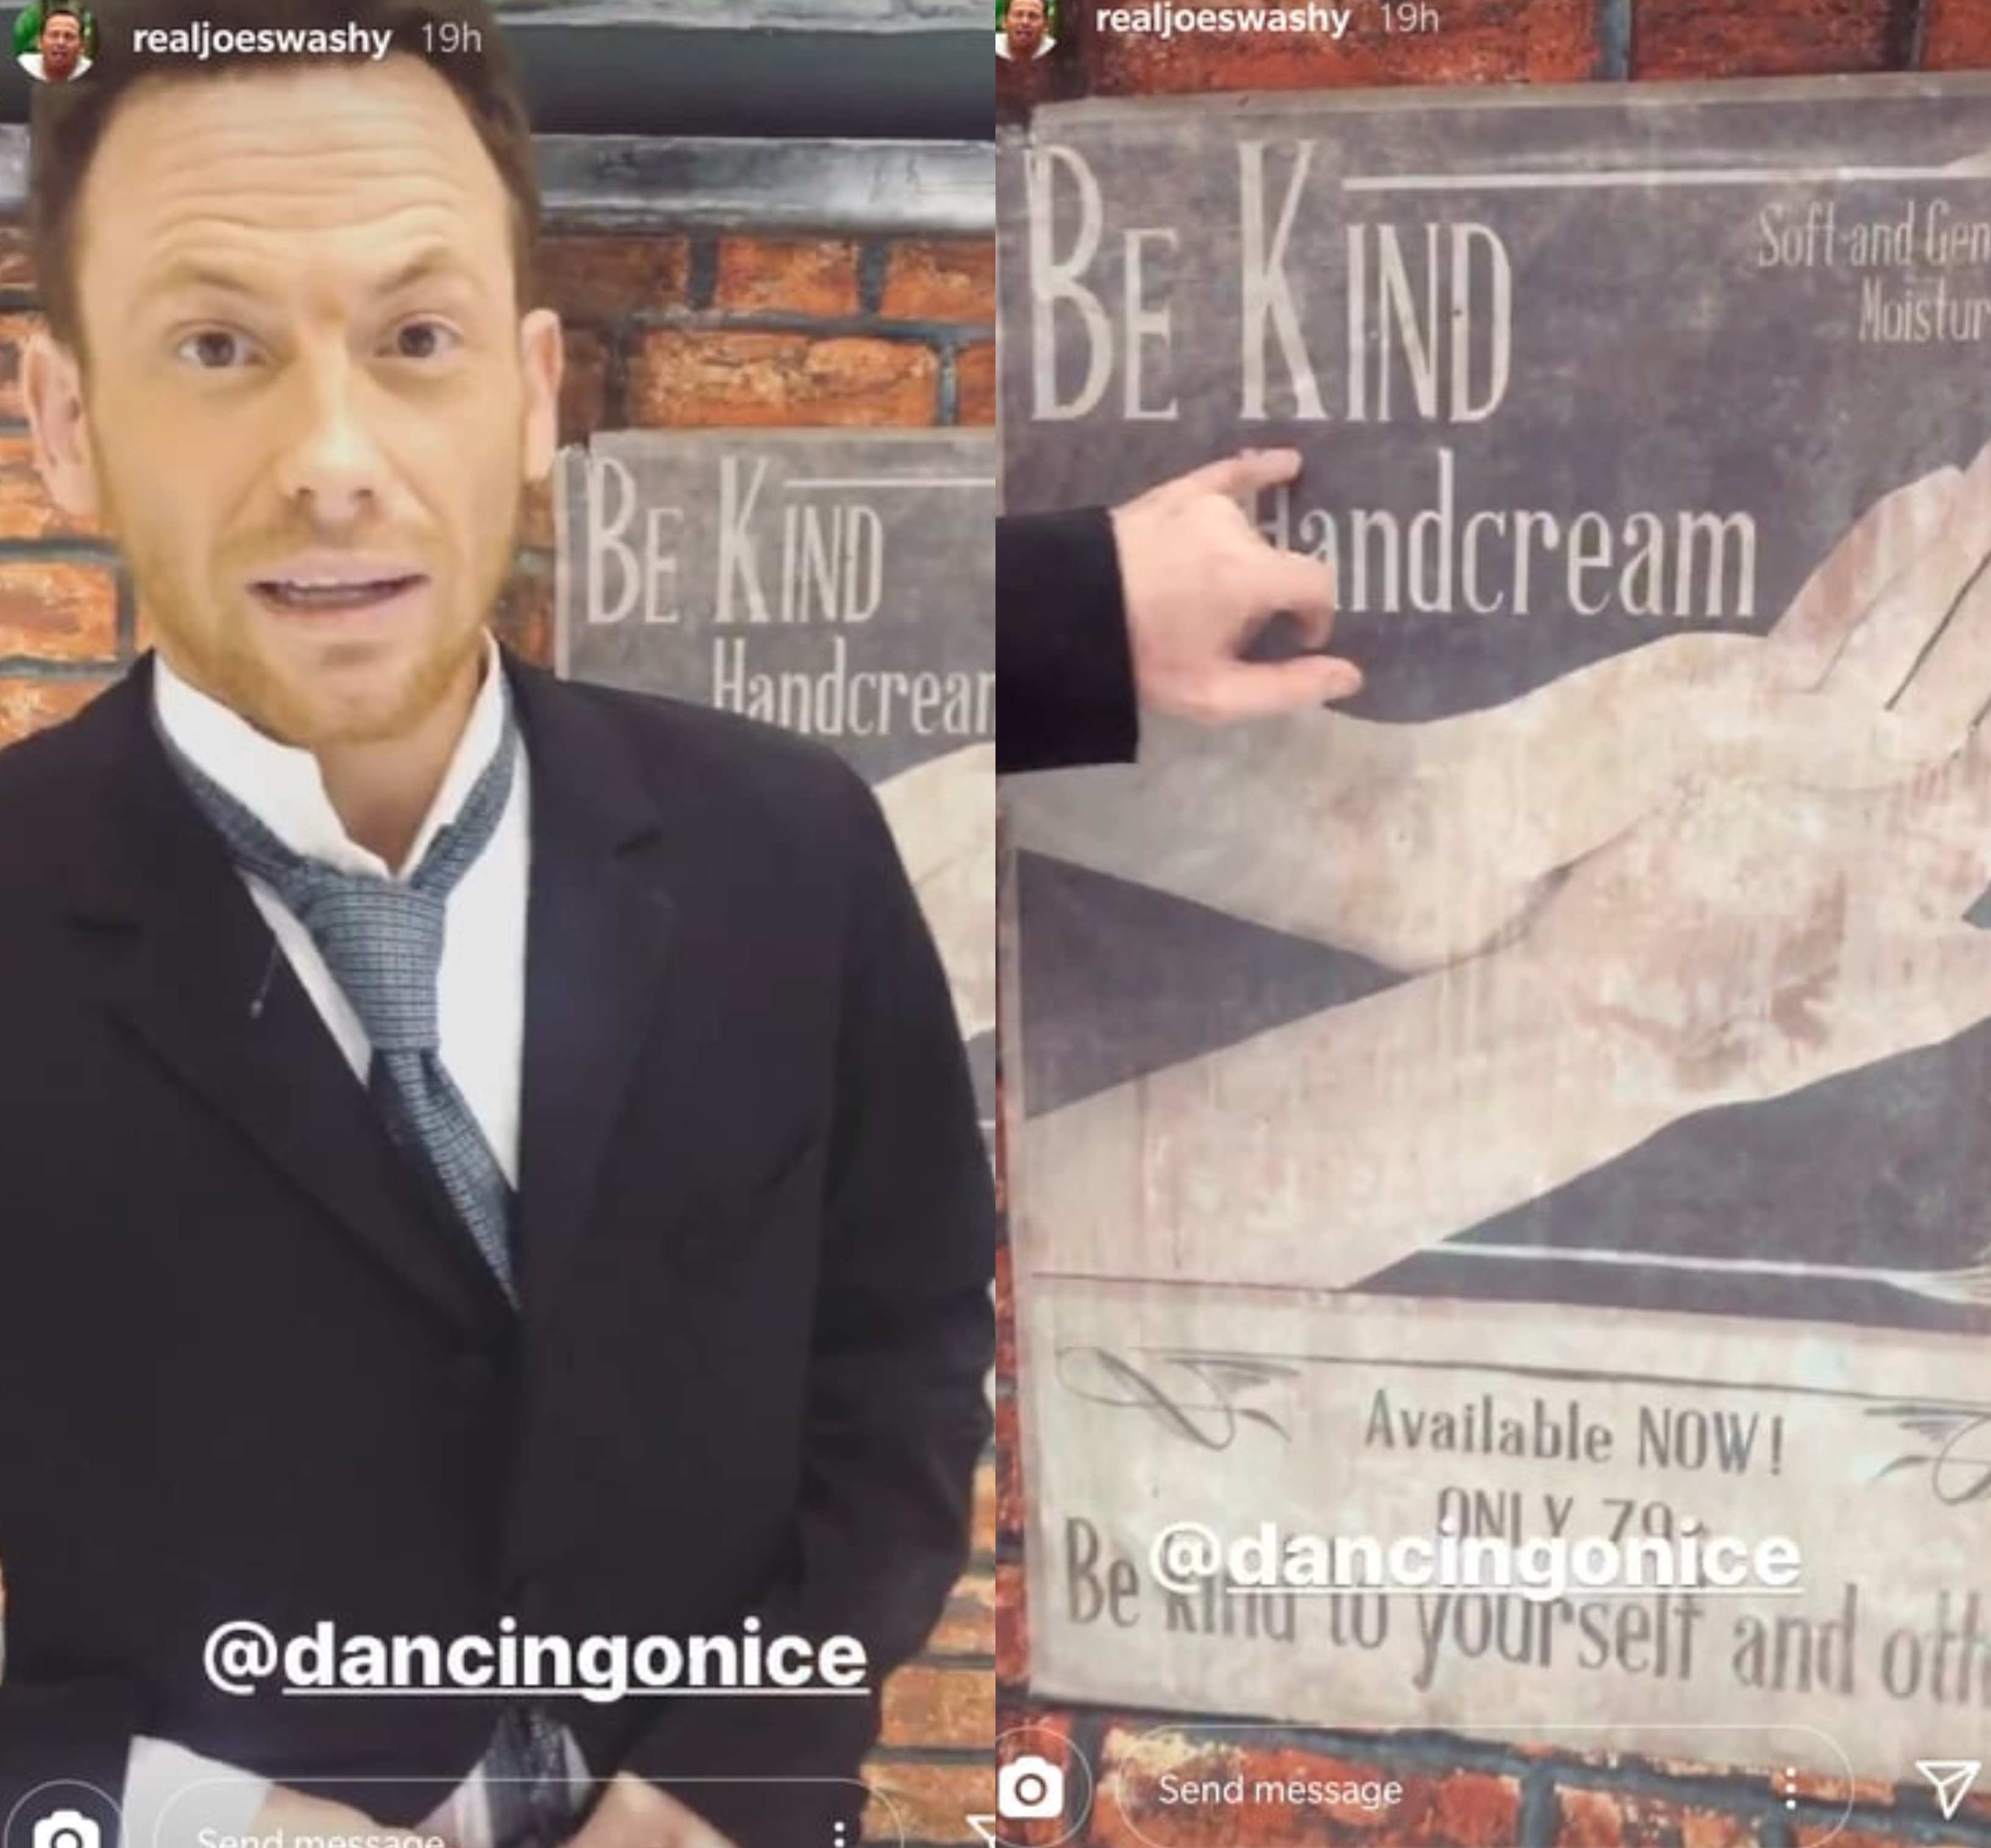 Joe Swash shows his followers the 'be kind' posters on his Instagram stories